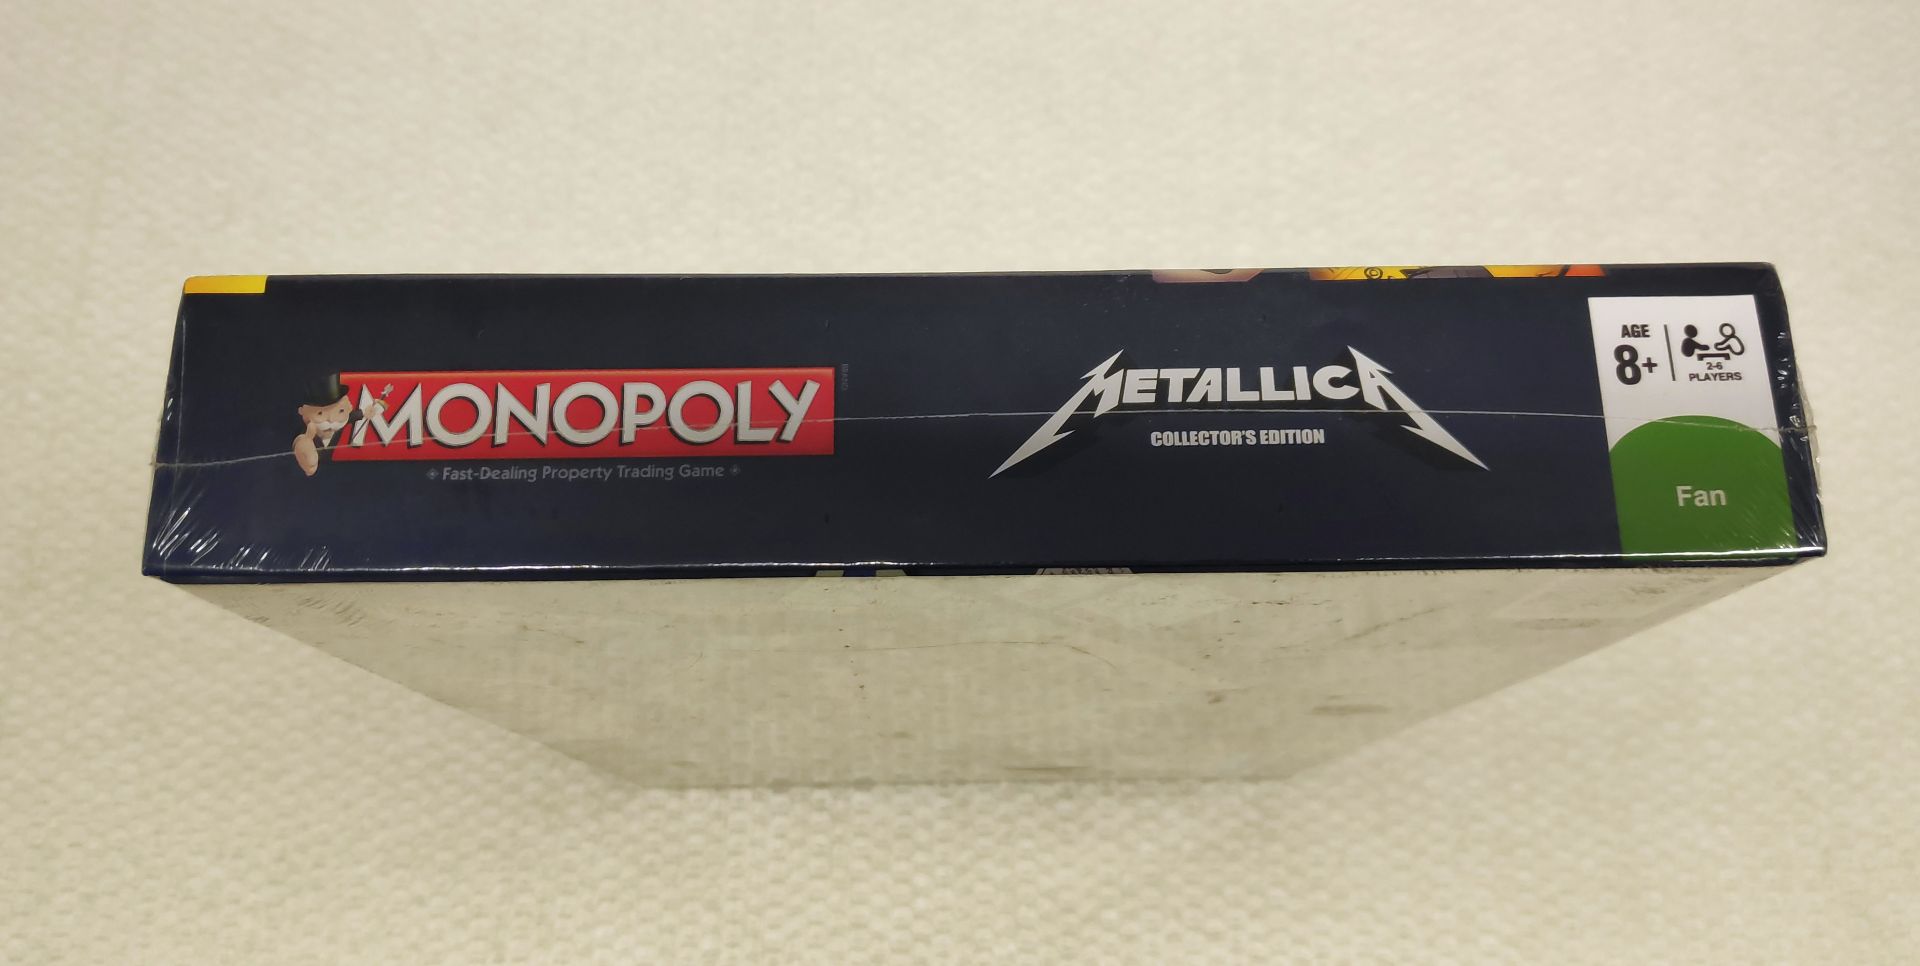 1 x Metallica Collector's Edition Monopoly - New/Sealed - CL720 - Location: Altrincham WA1 - Image 4 of 8